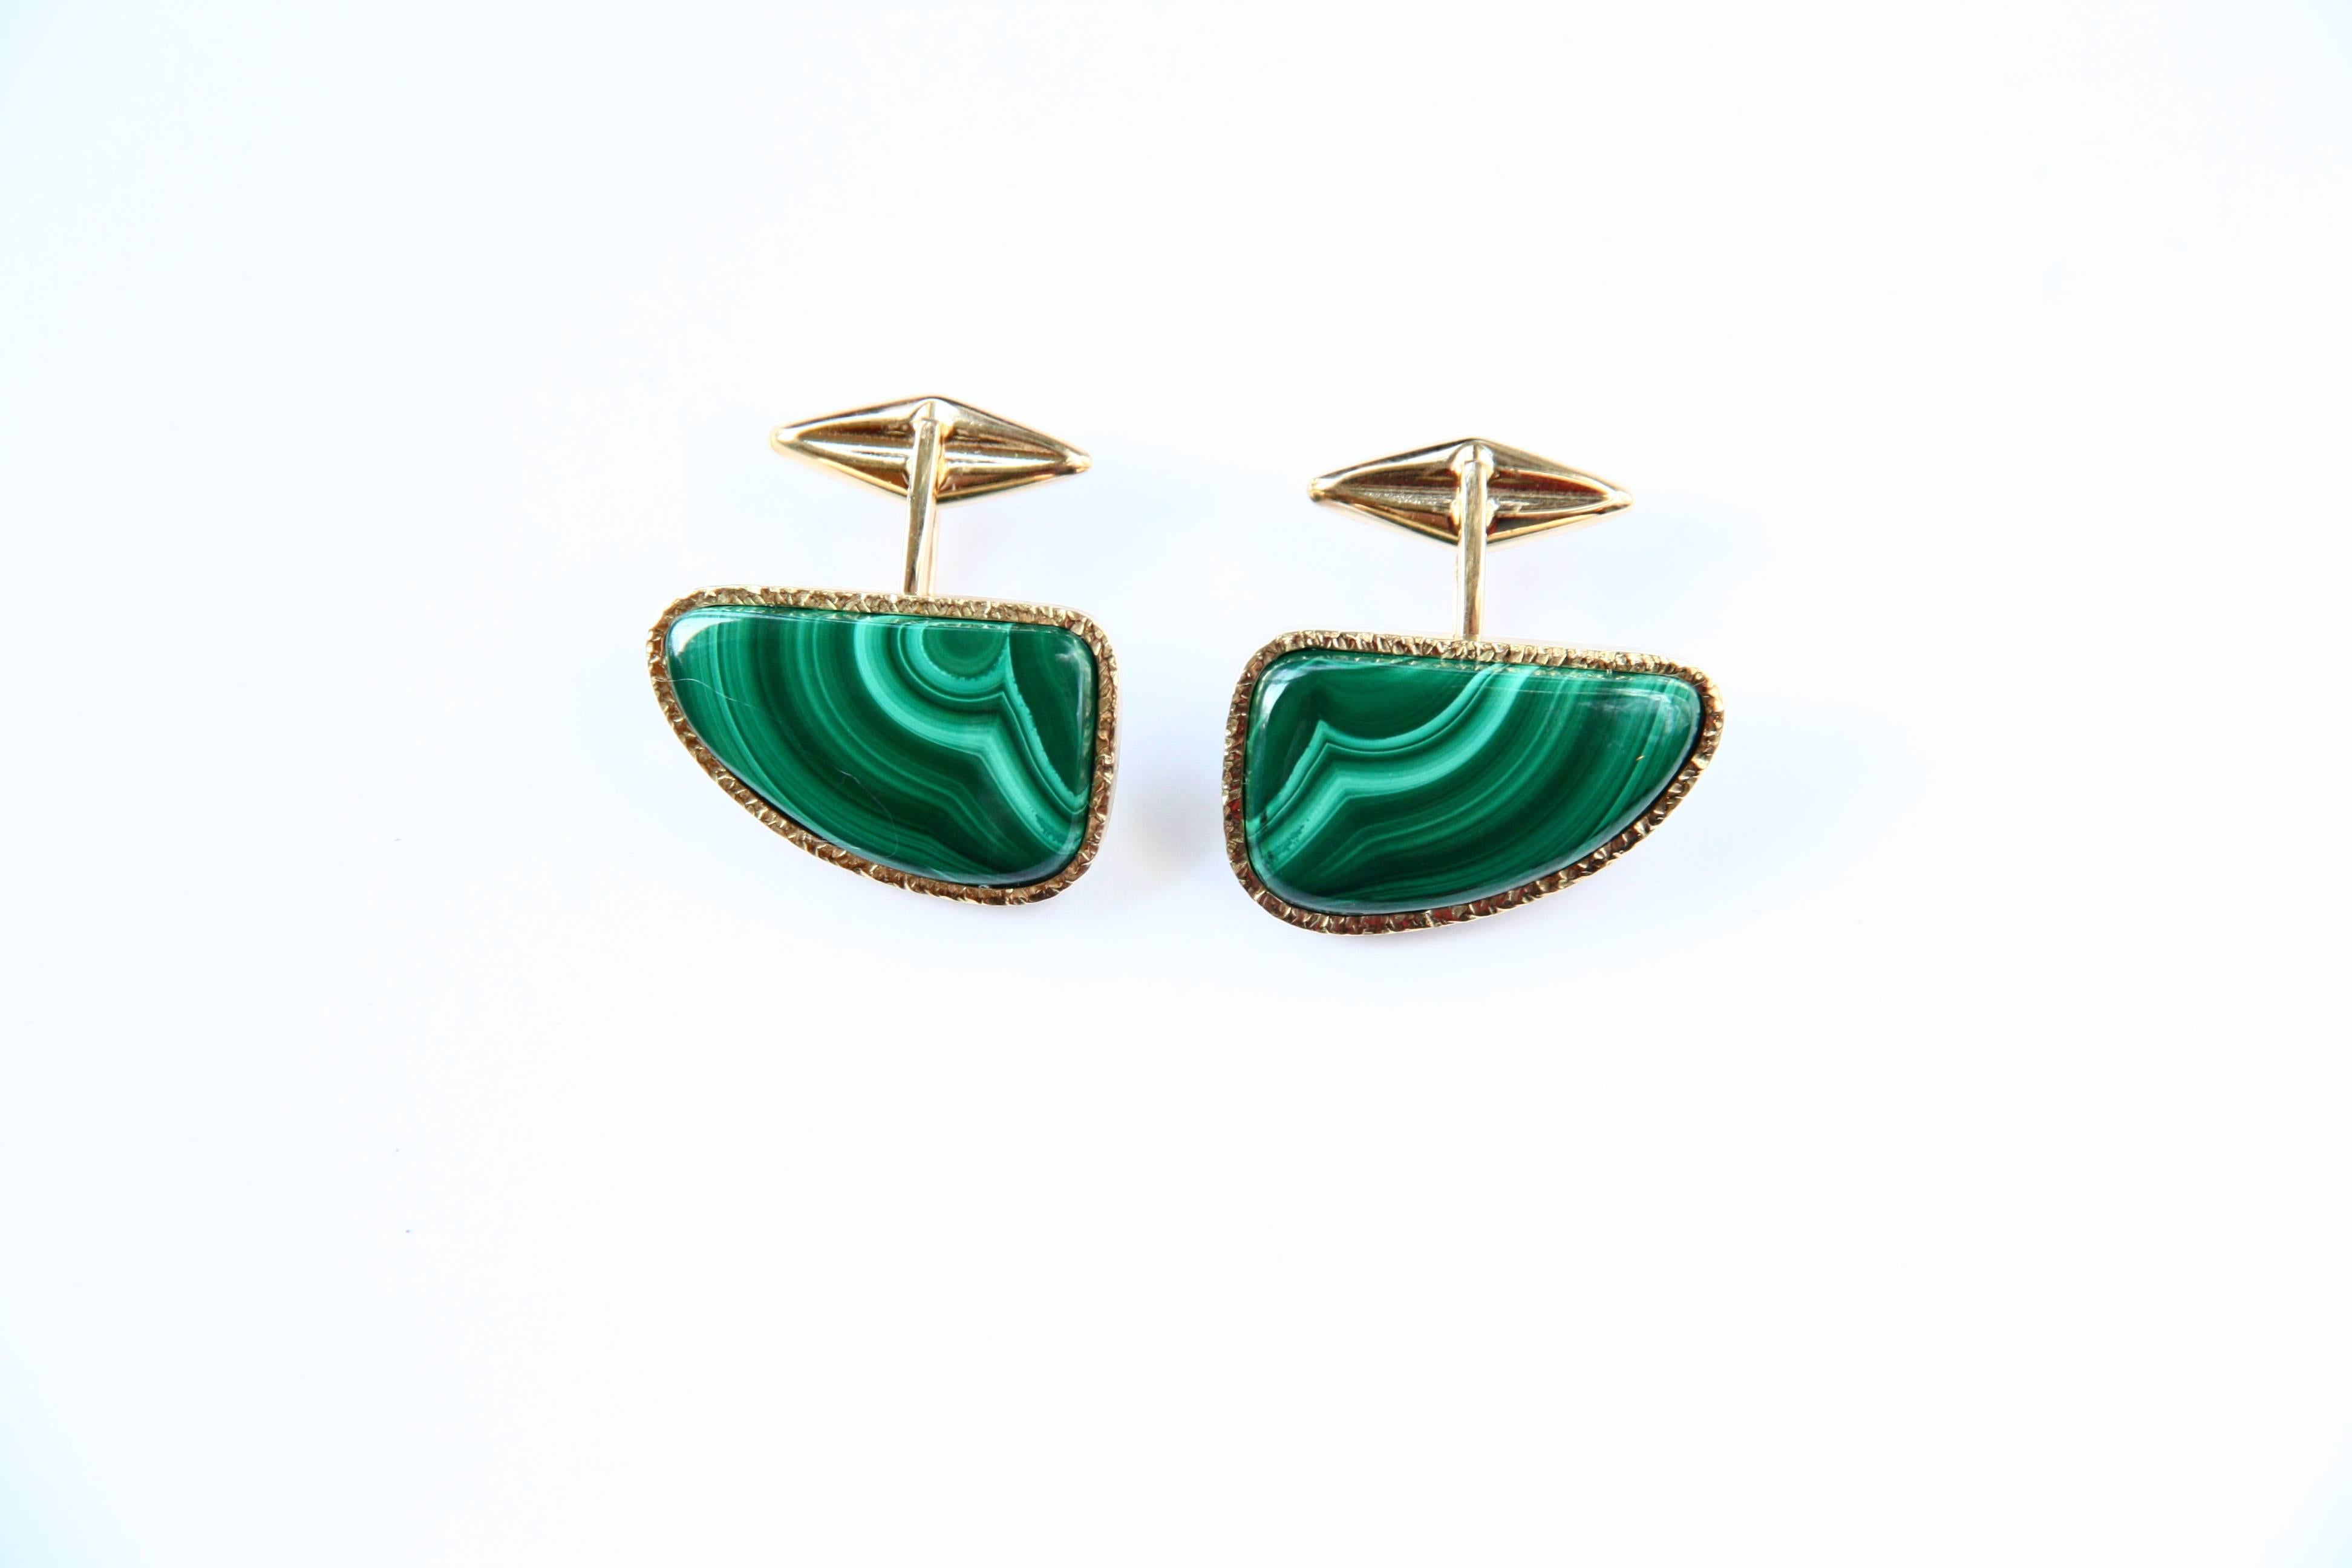  Very nice shape malachite cufflinks, 18kt Gold  gr. 6,73.
All Giulia Colussi jewelry is new and has never been previously owned or worn. Each item will arrive at your door beautifully gift wrapped in our boxes, put inside an elegant pouch or jewel